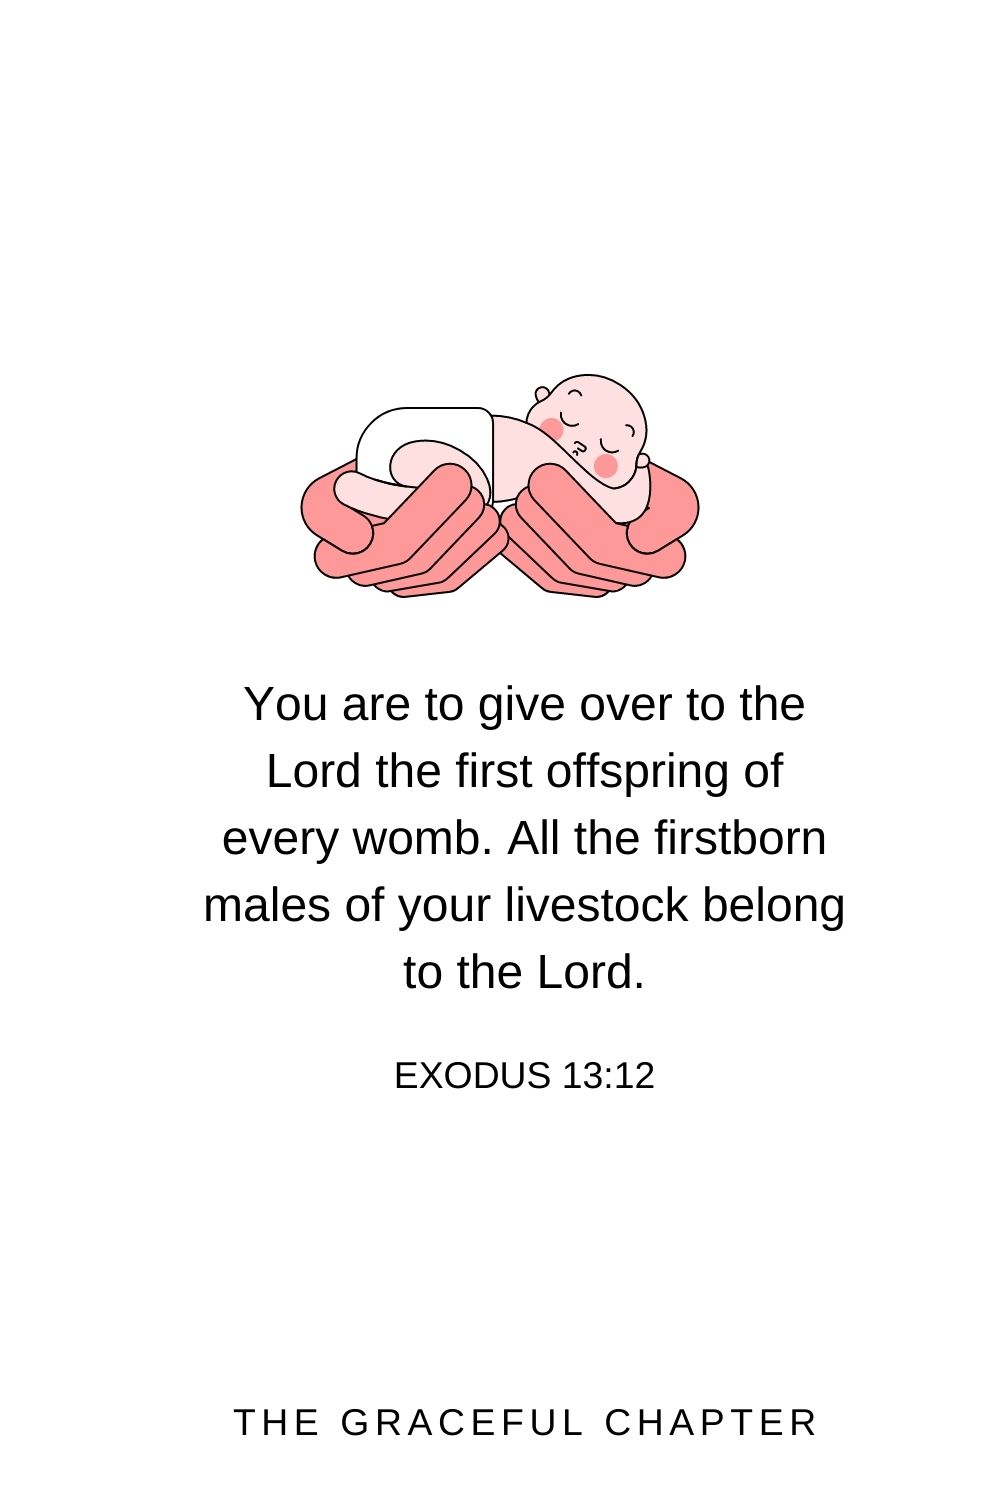 You are to give over to the Lord the first offspring of every womb. All the firstborn males of your livestock belong to the Lord. Exodus 13:12